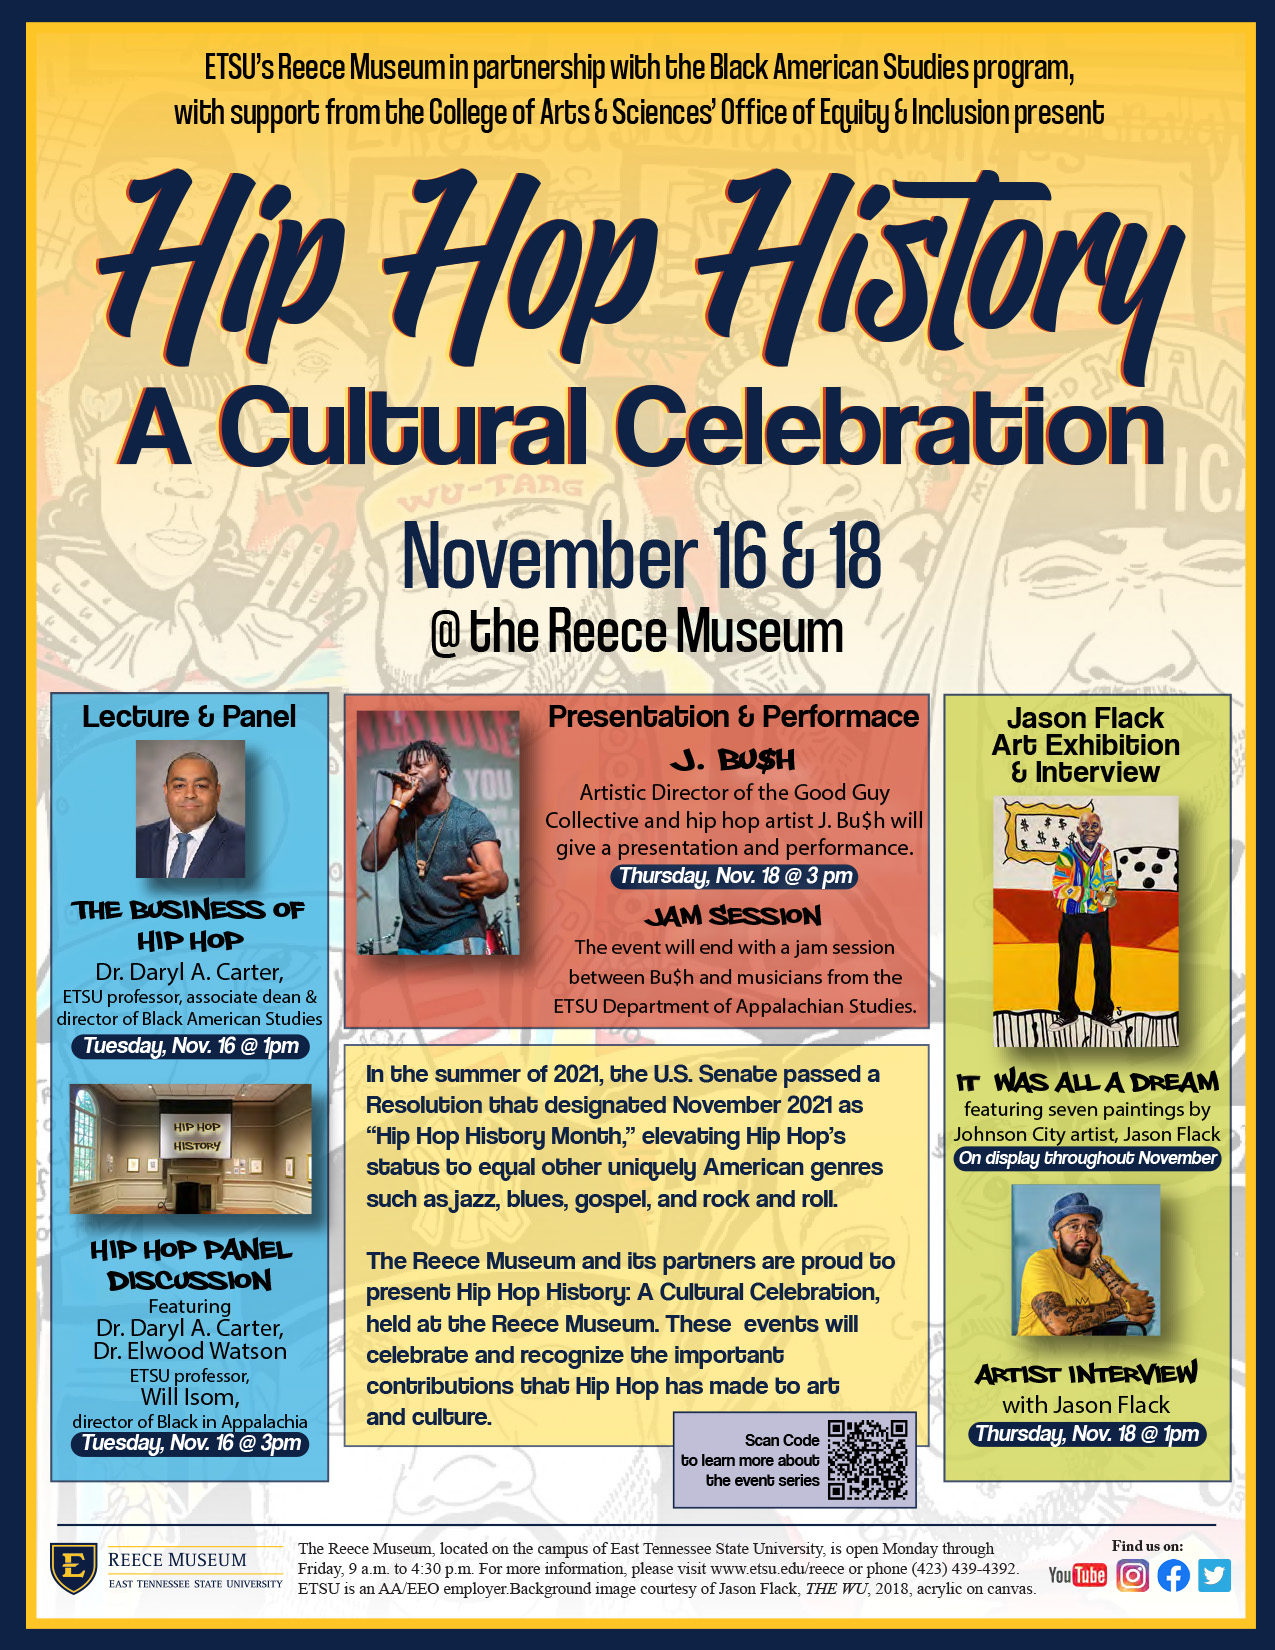 Hip-Hop History month flyer with event details described in the commentary above